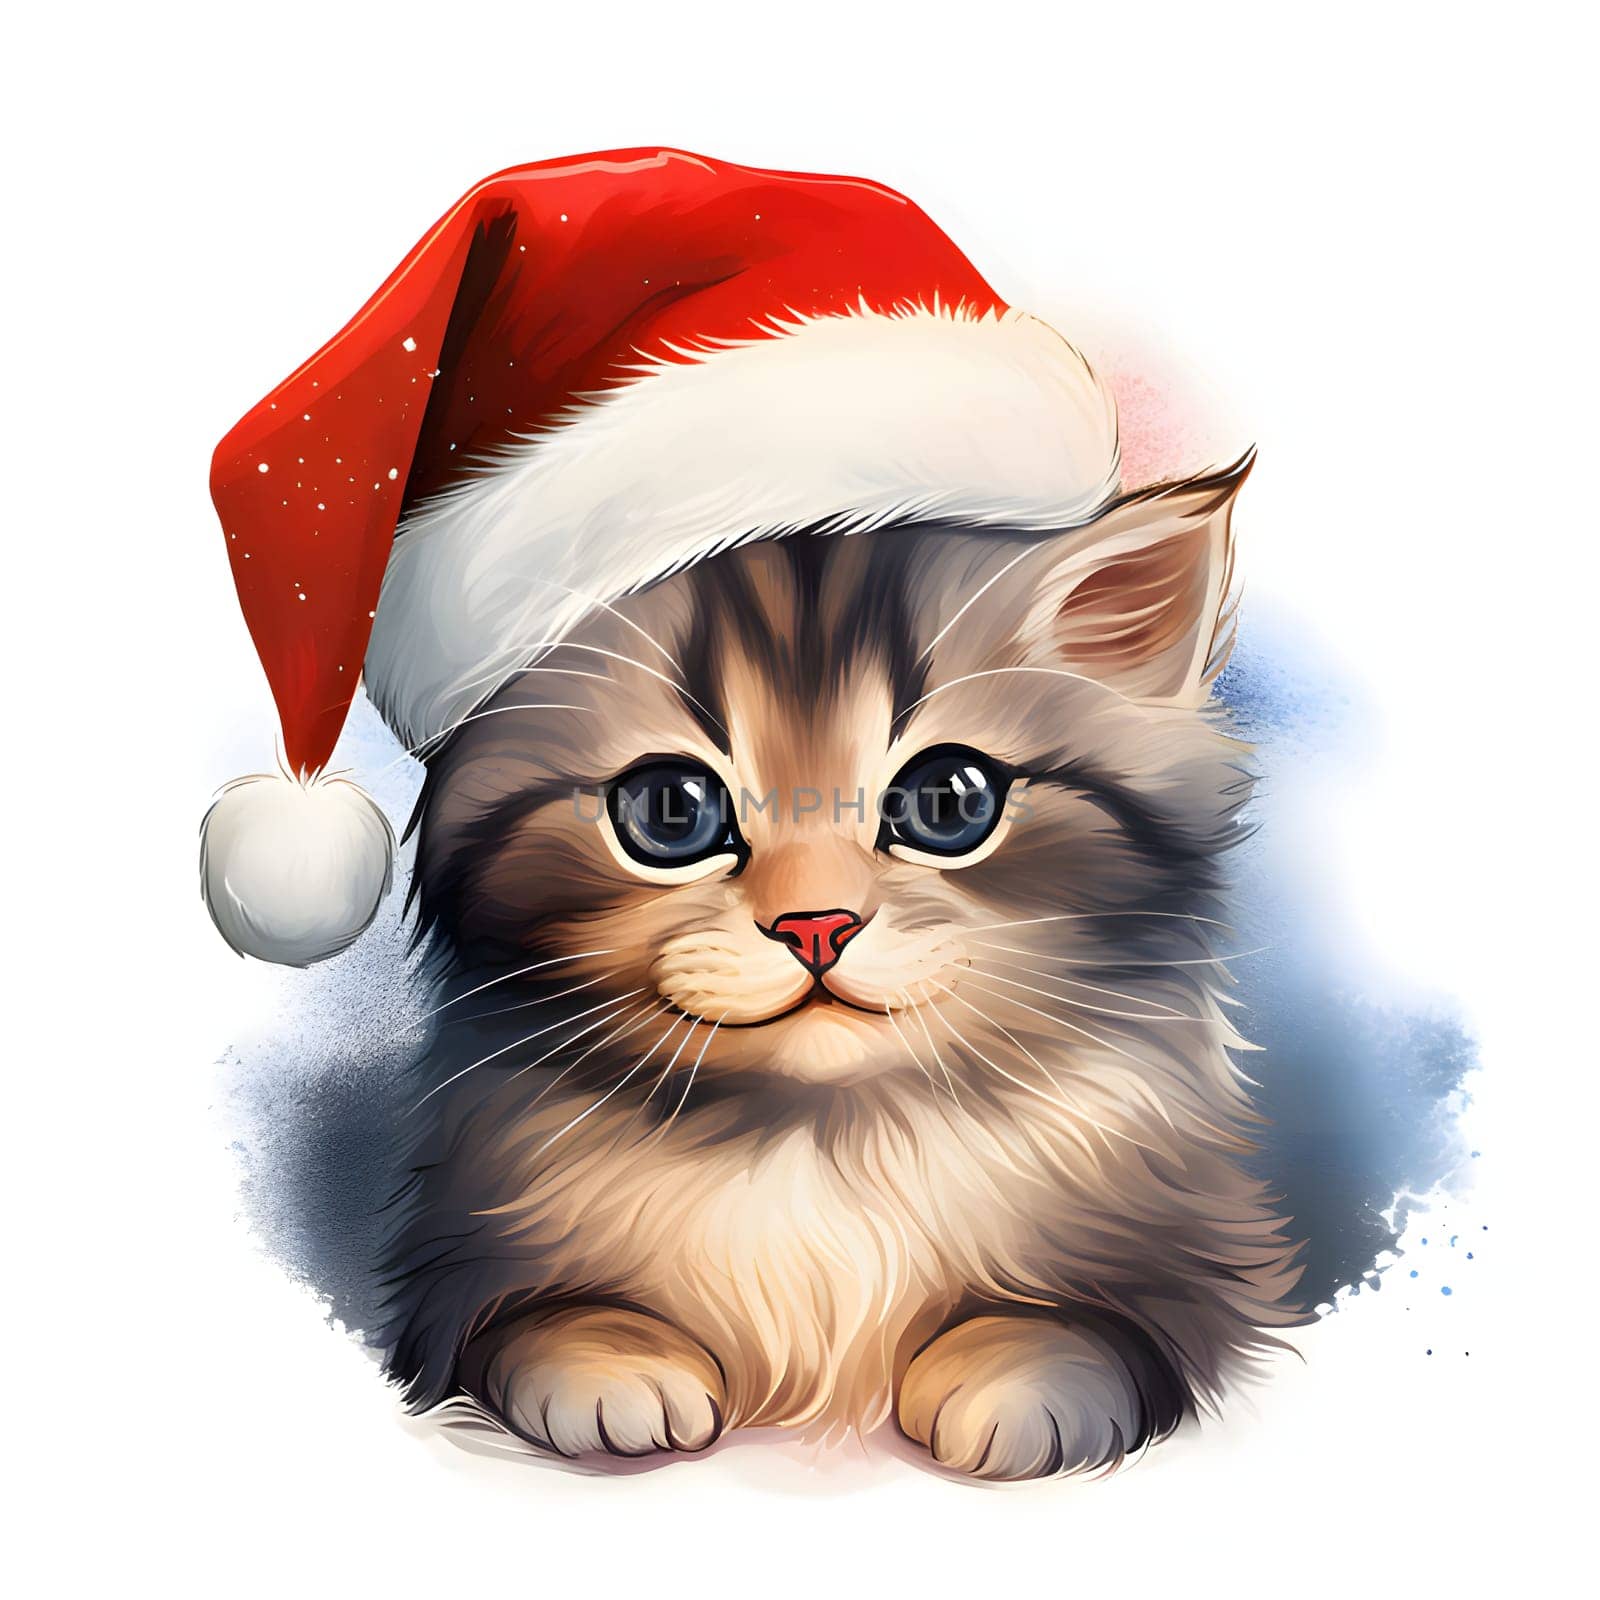 Illustration of a tiny kitten wearing a Santa hat. Christmas card as a symbol of remembrance of the birth of the Savior. by ThemesS